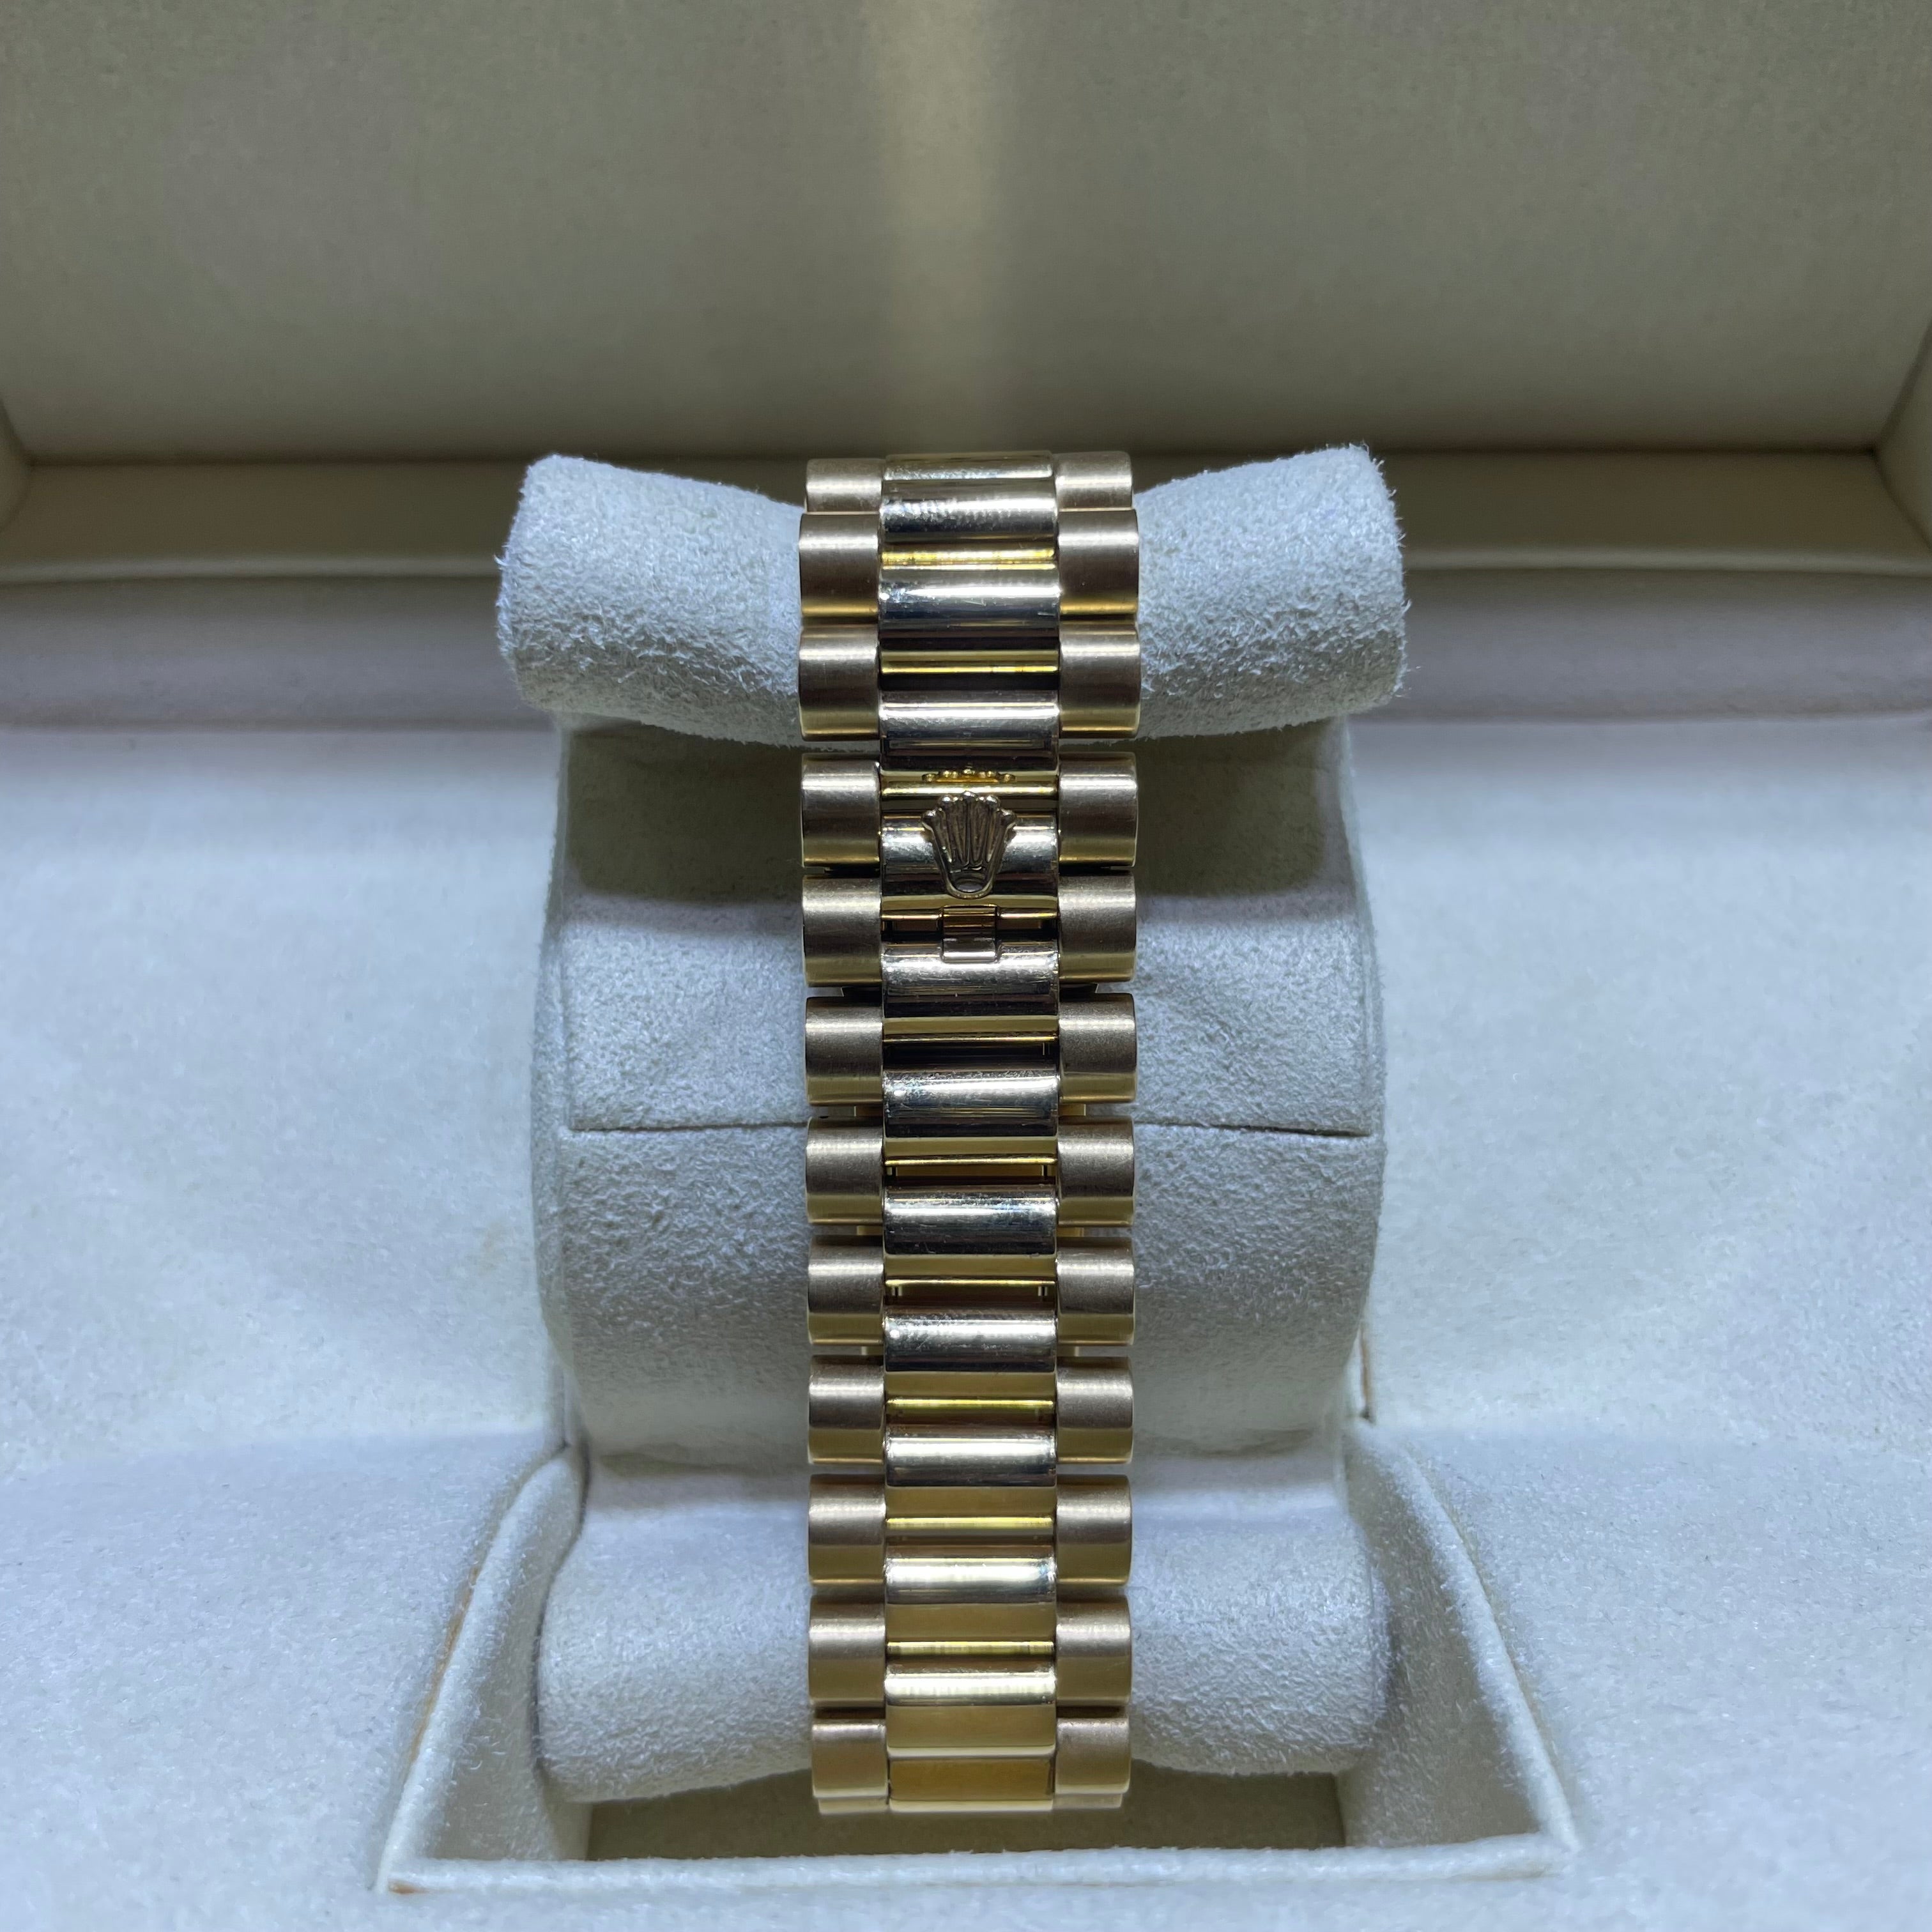 41mm Solid Gold Rolex Presidential